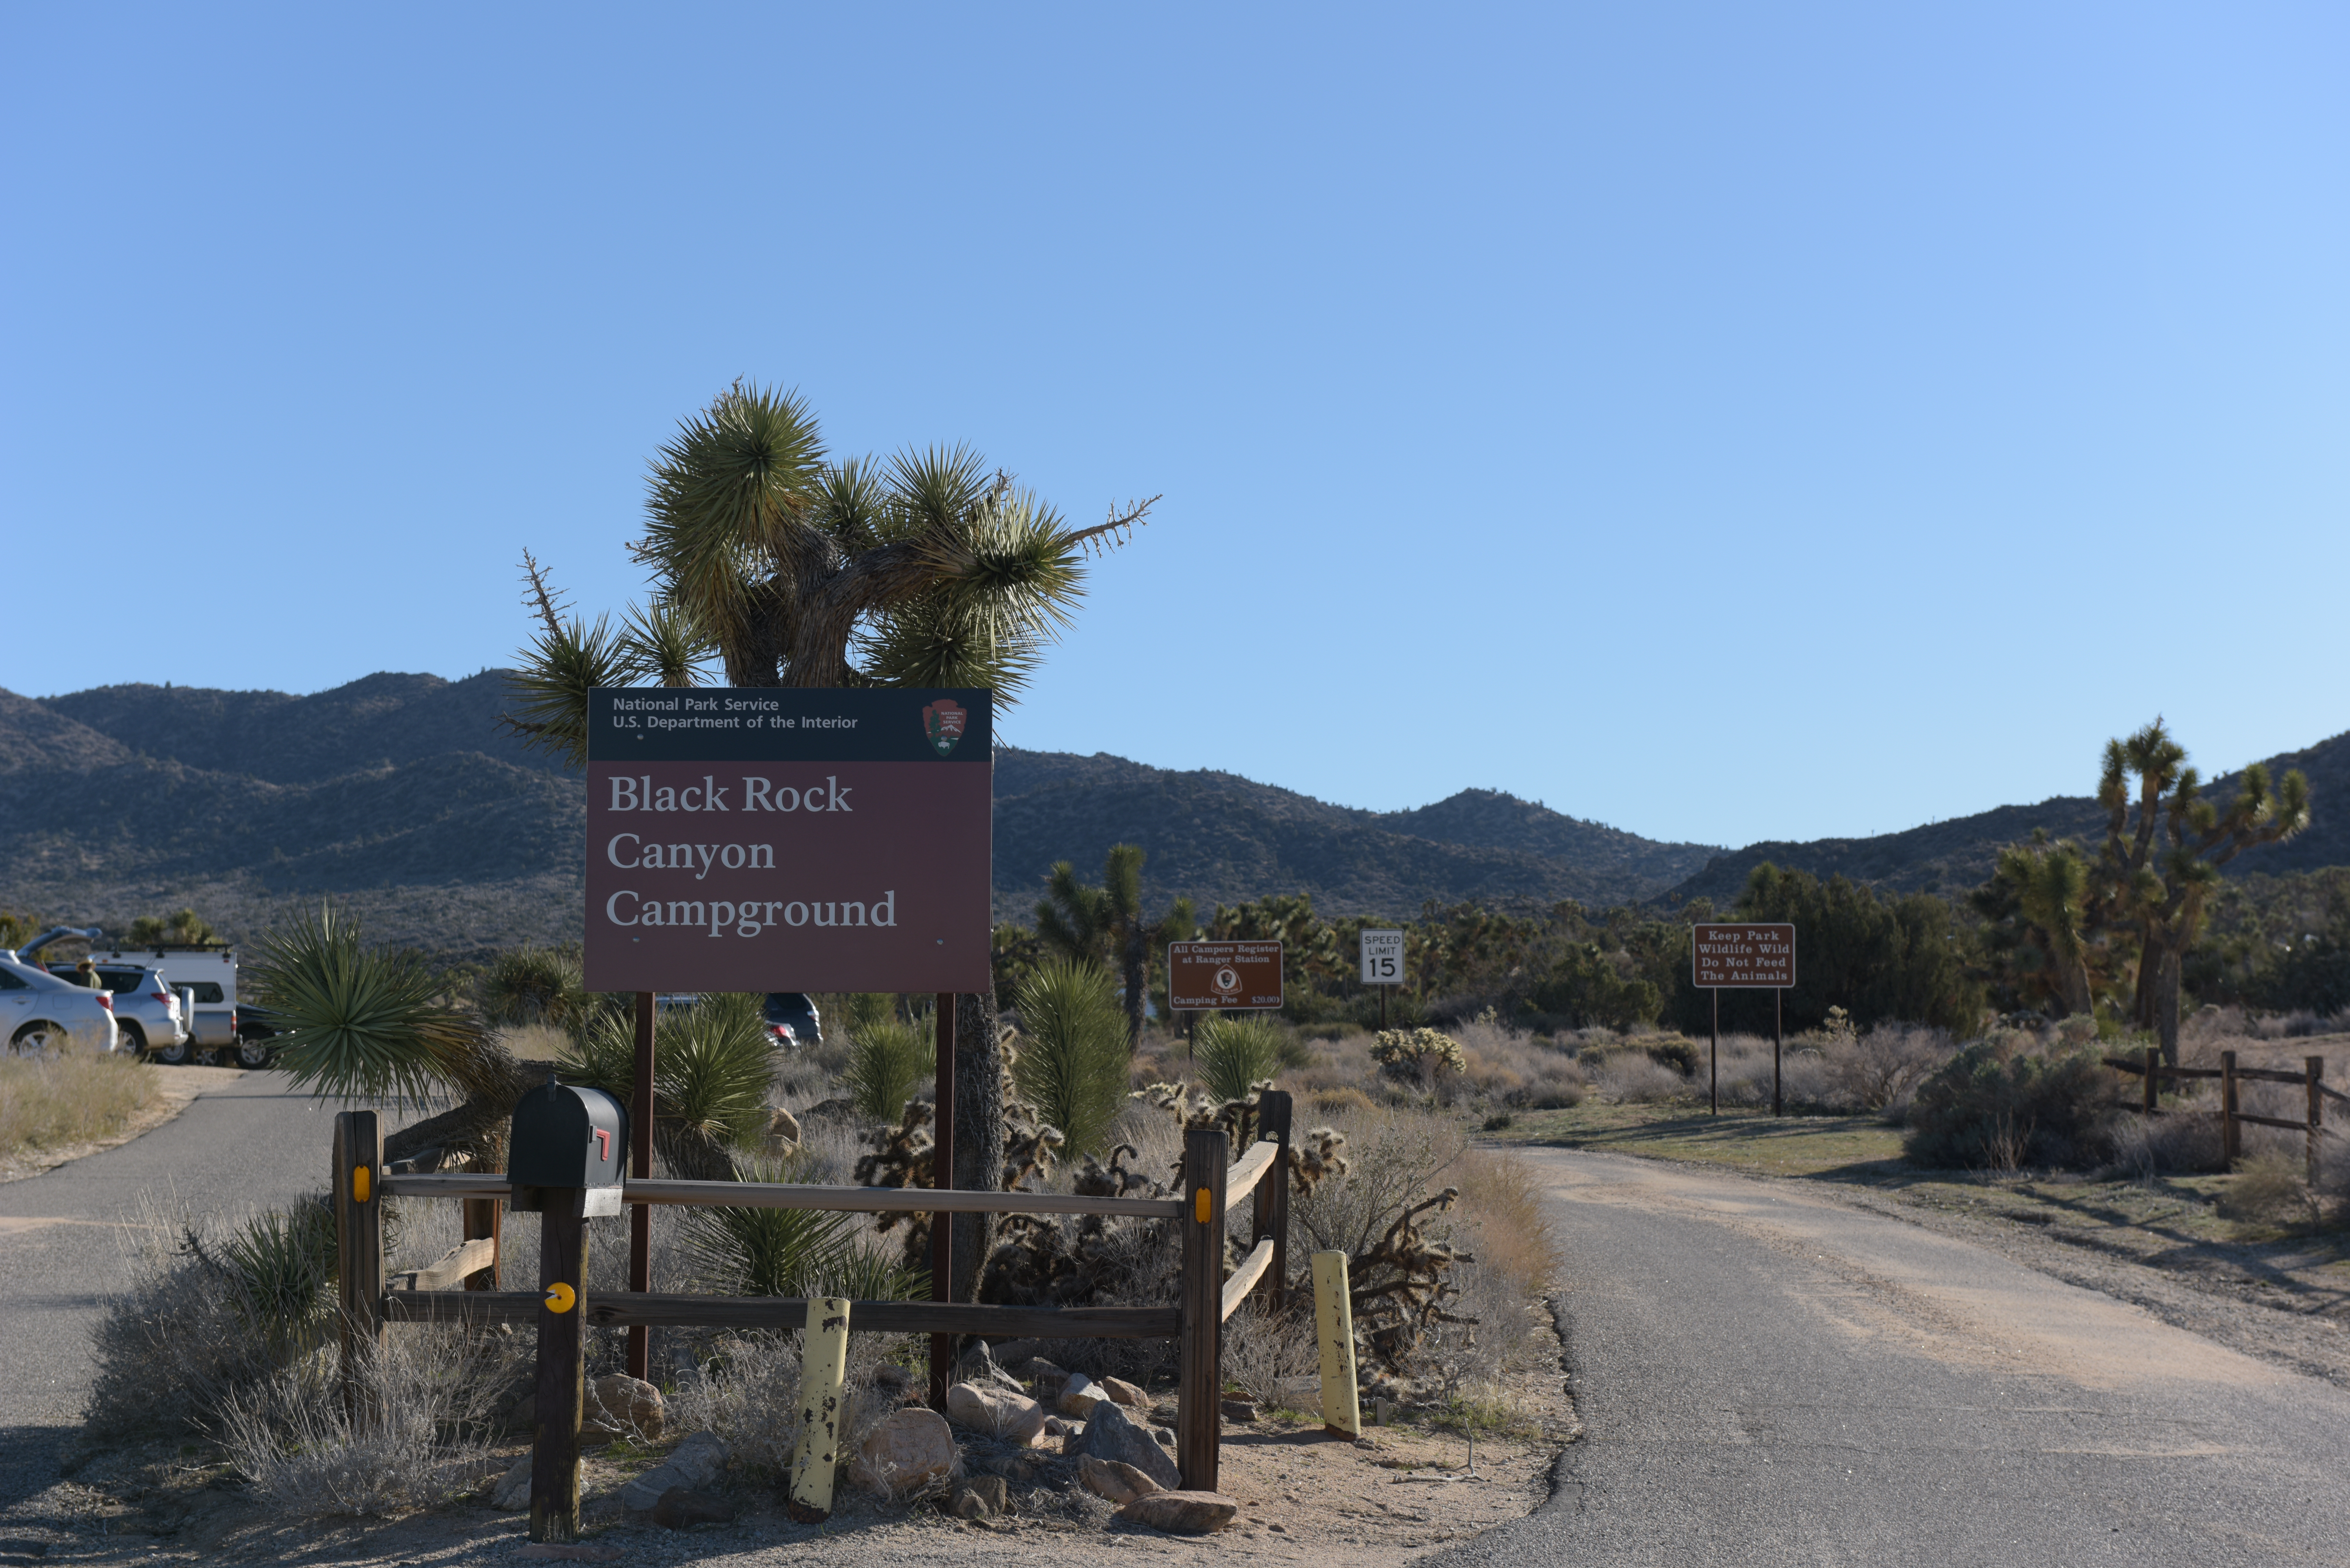 A road leads past a sign that says "Black Rock Canyon Campground"